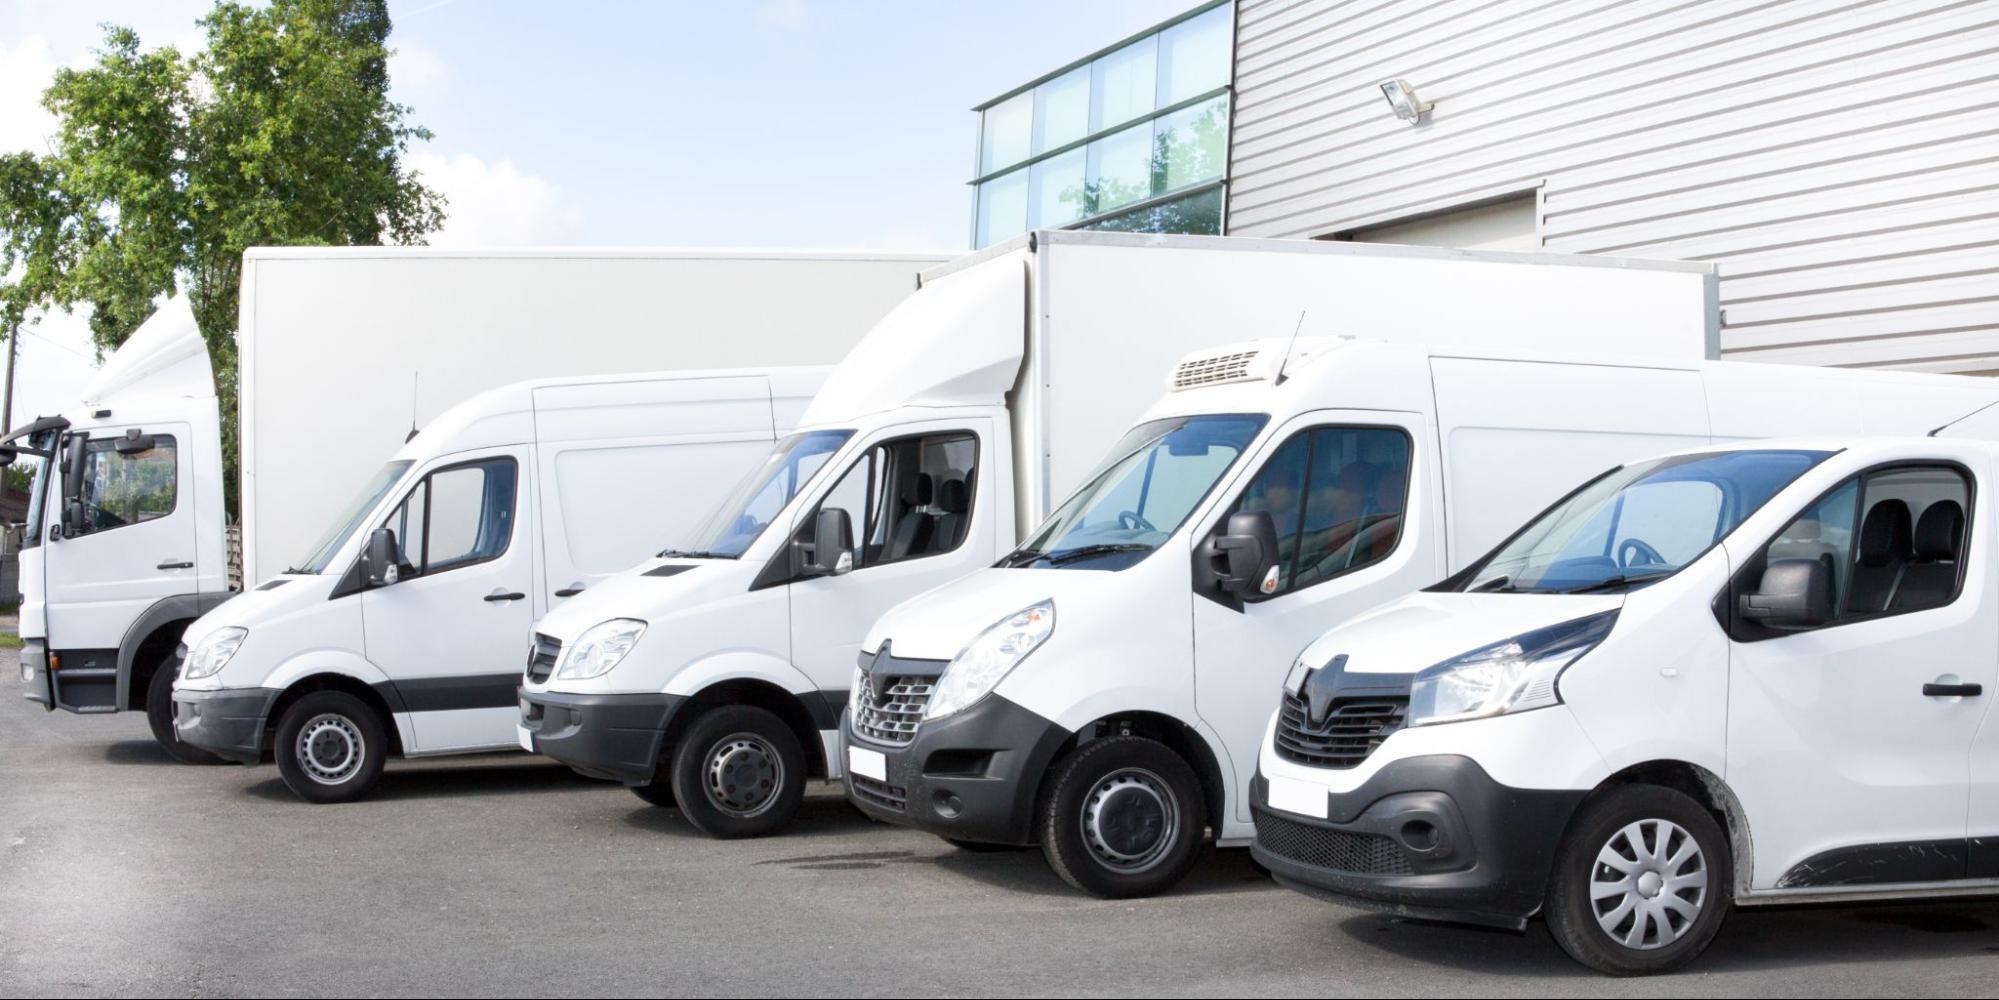 Different types of vehicles used for commercial purposes that are covered by fleet insurance